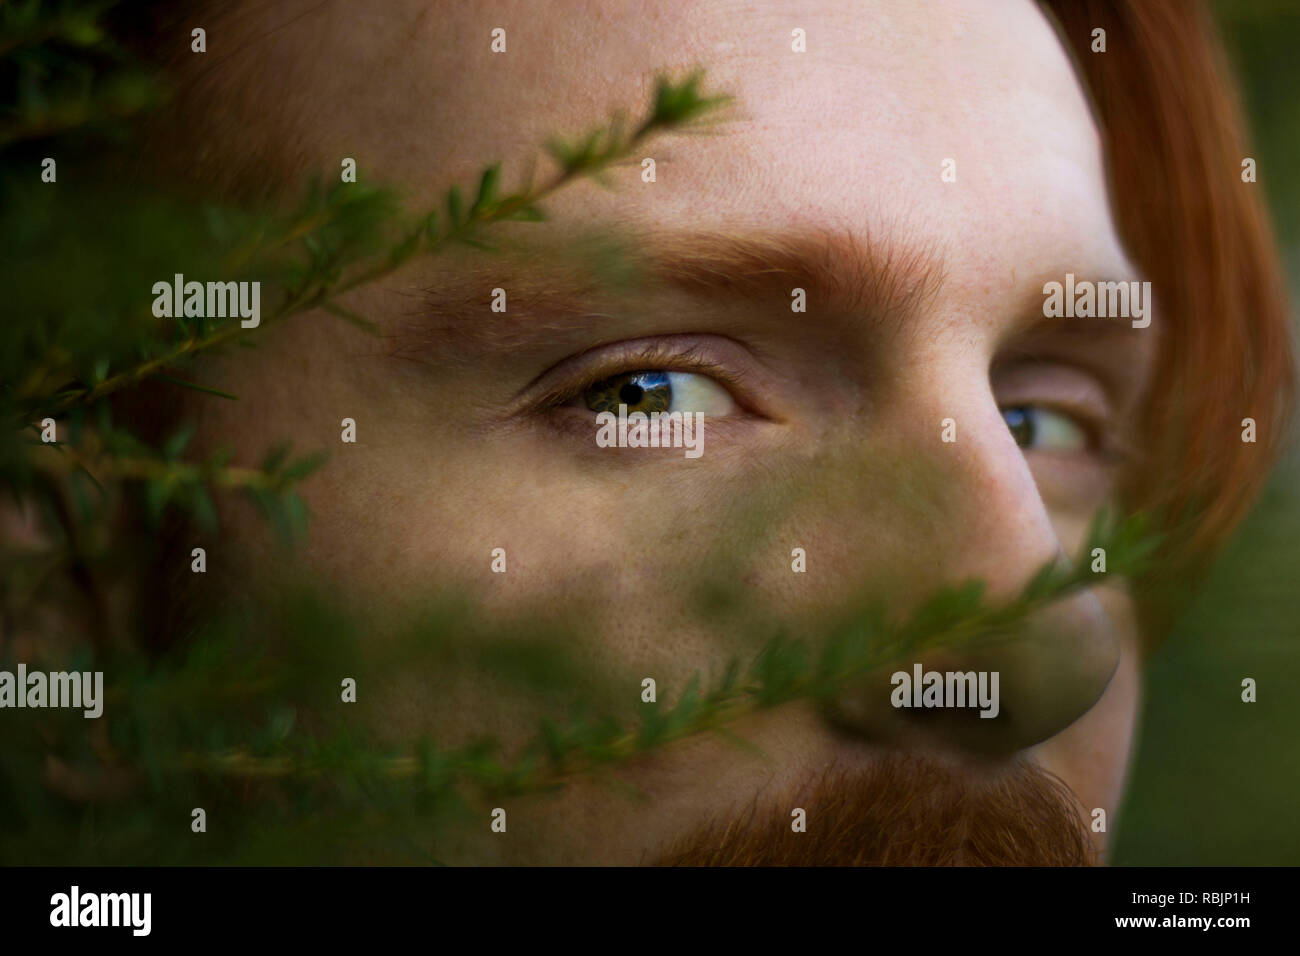 A read haired boy looking through the bushes Stock Photo